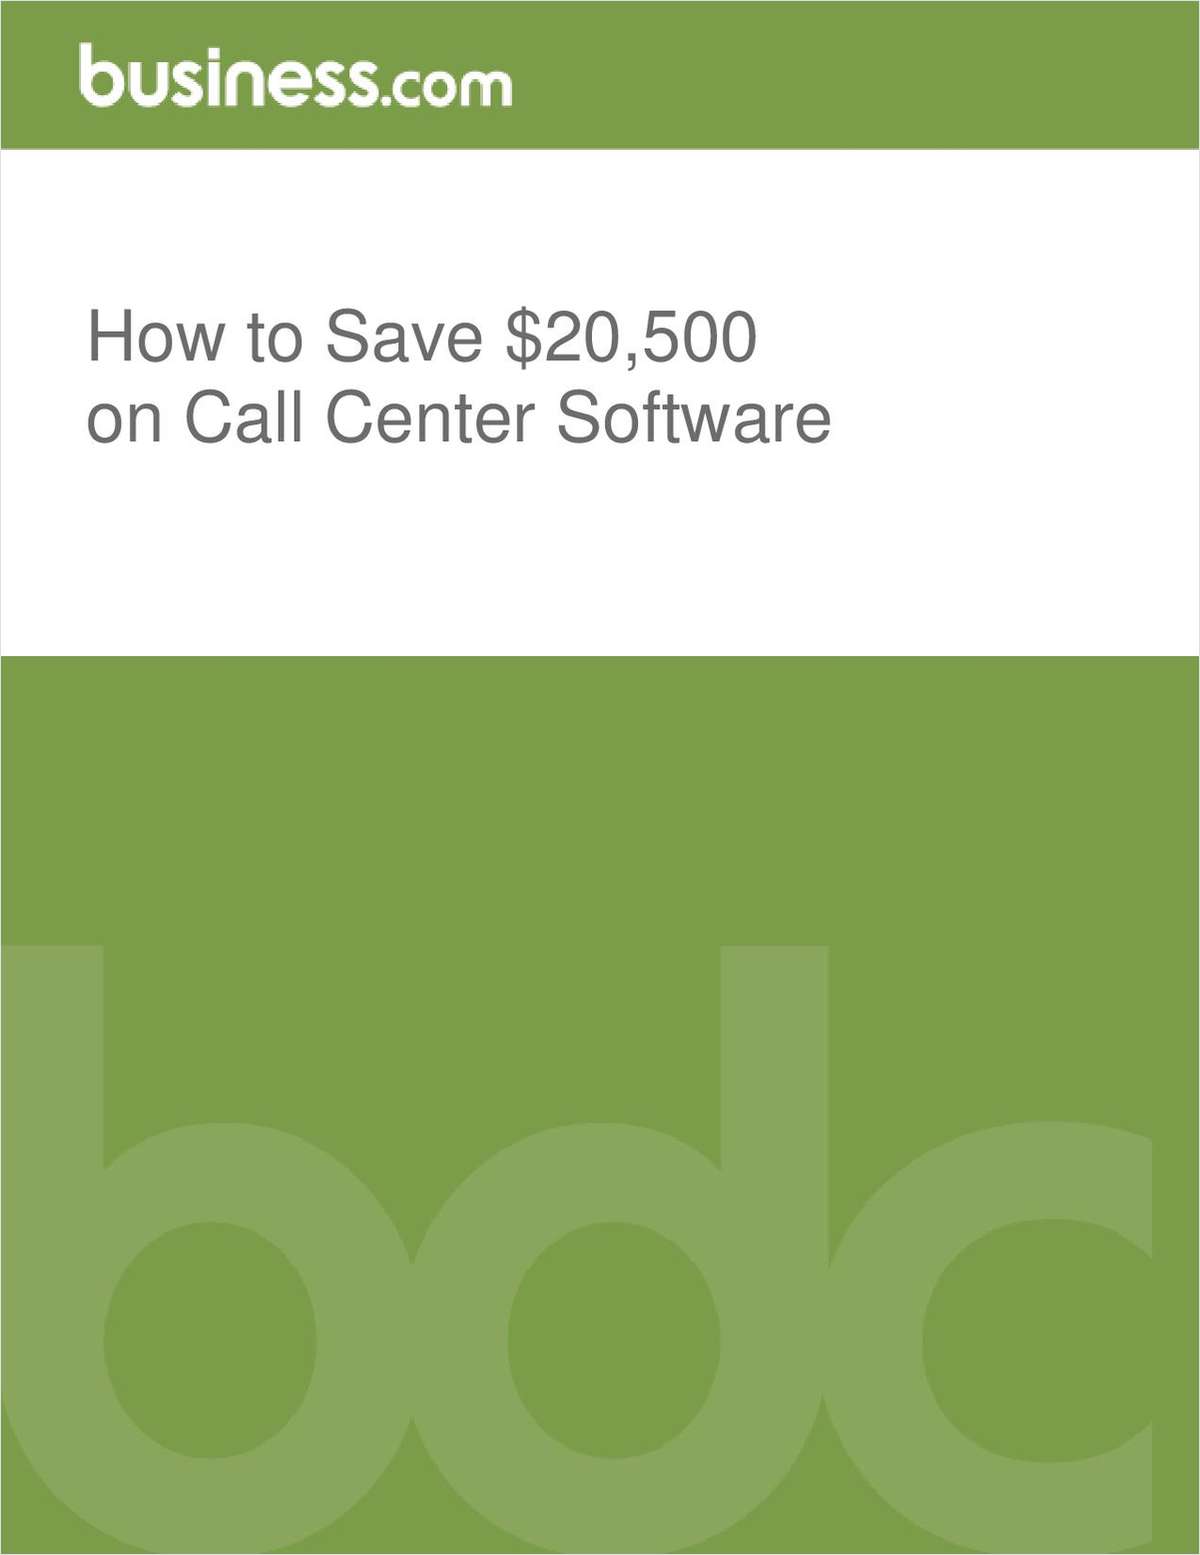 How to Save $20,500 on Call Center Software